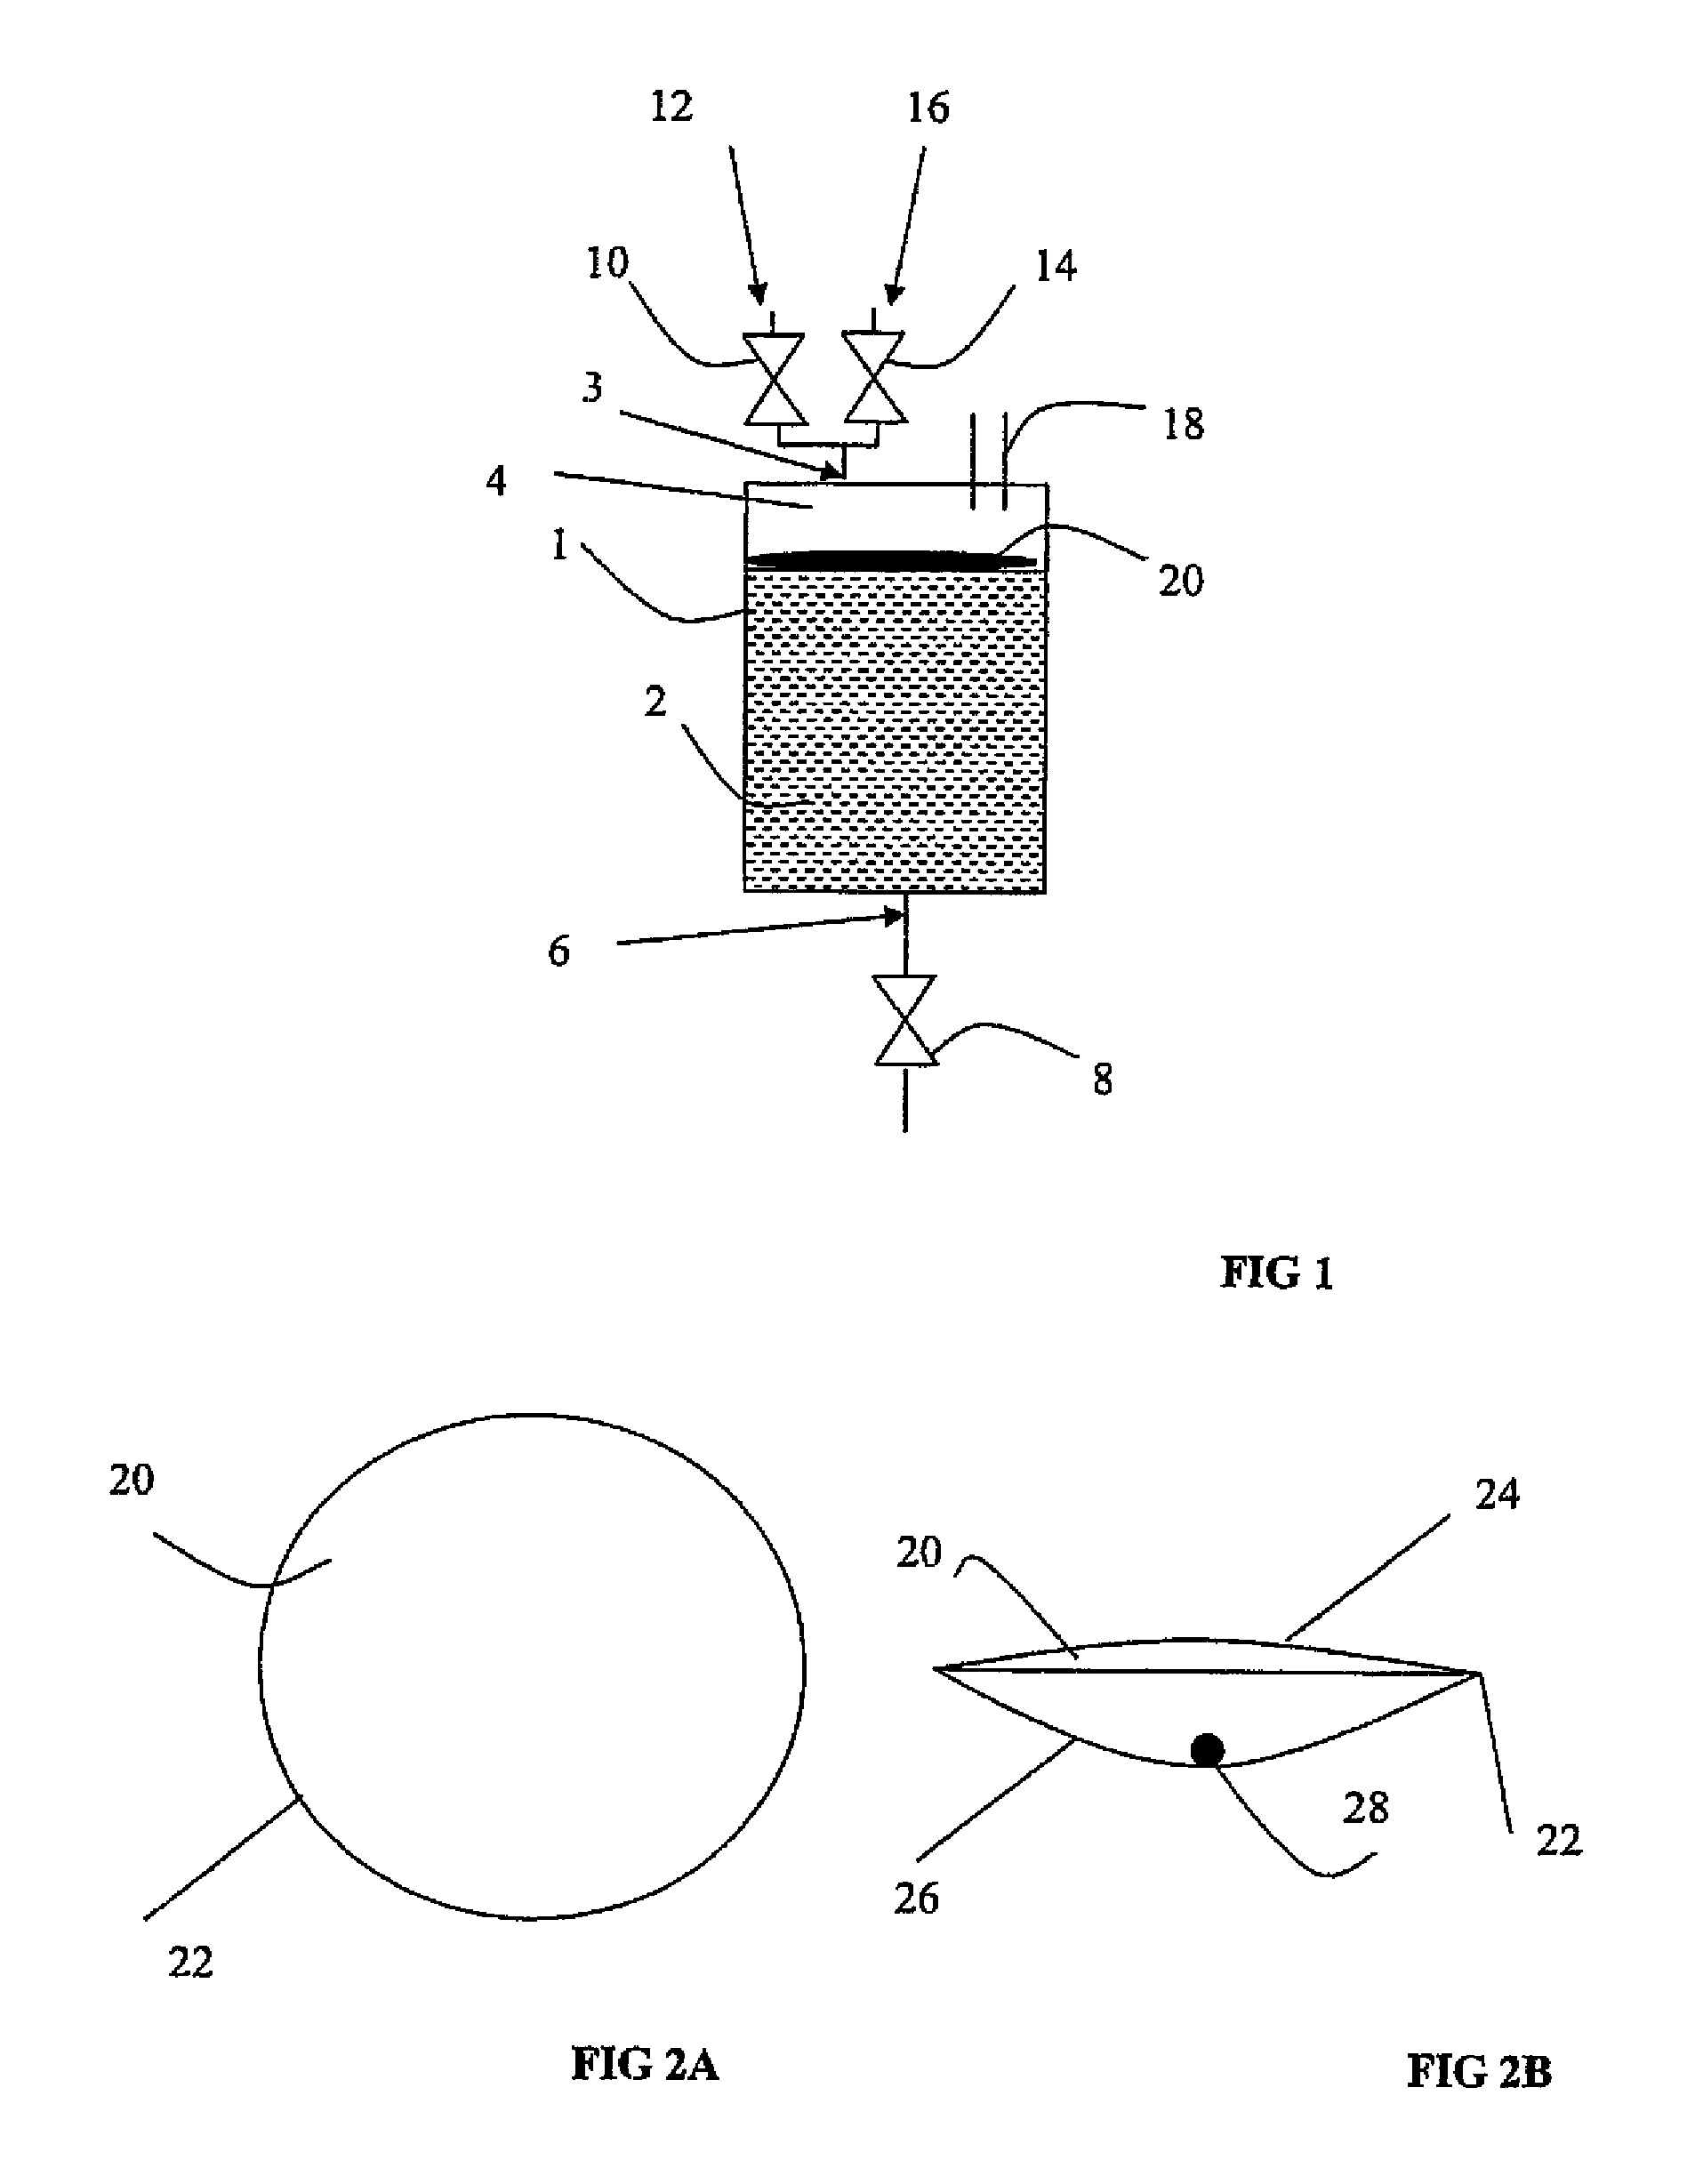 Diffusion barrier in a delivery apparatus for pressurized medical liquids